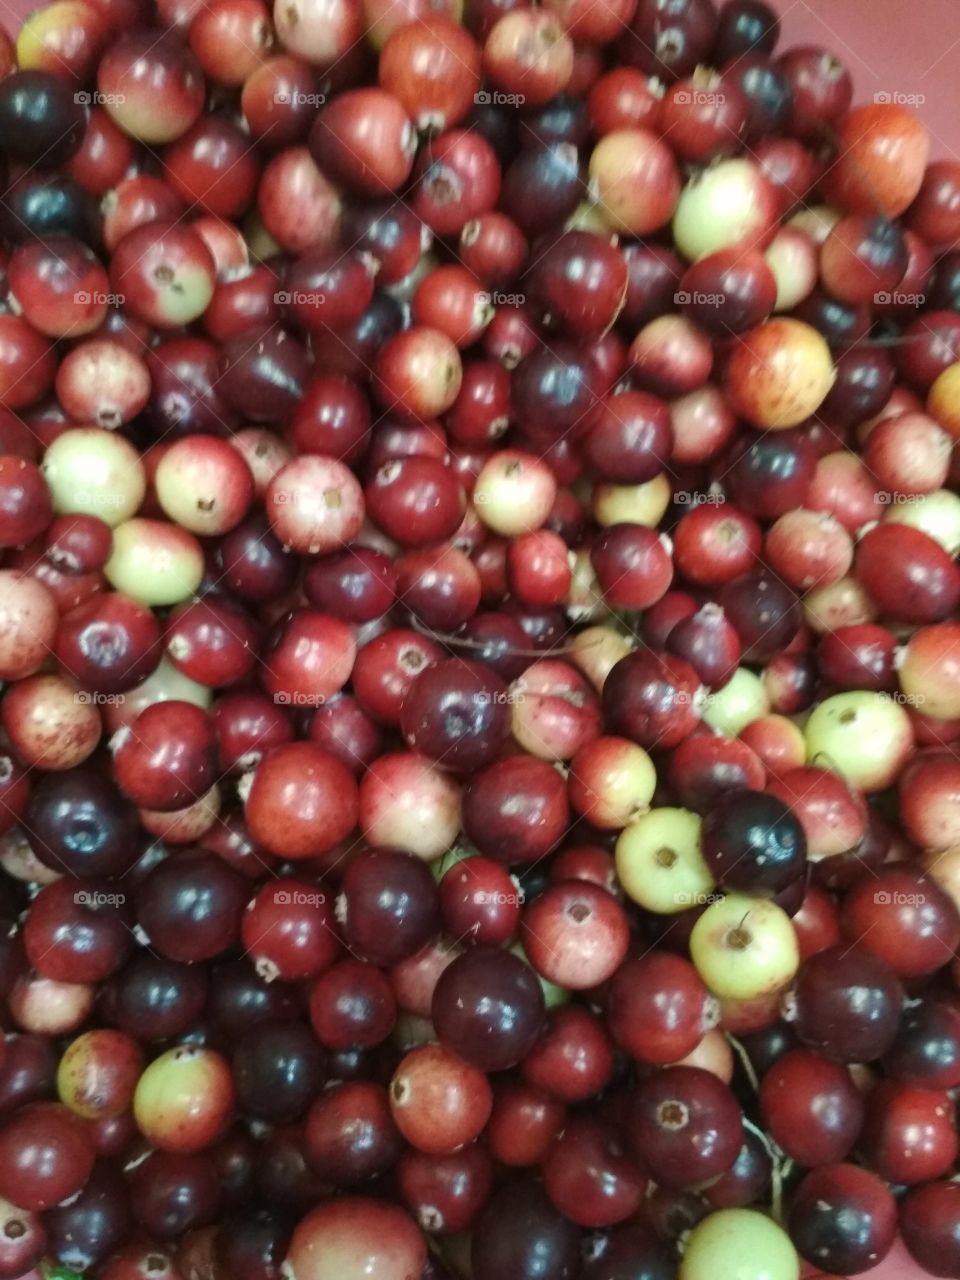 cranberries grow on a swamp, bright, ripe harvested in September